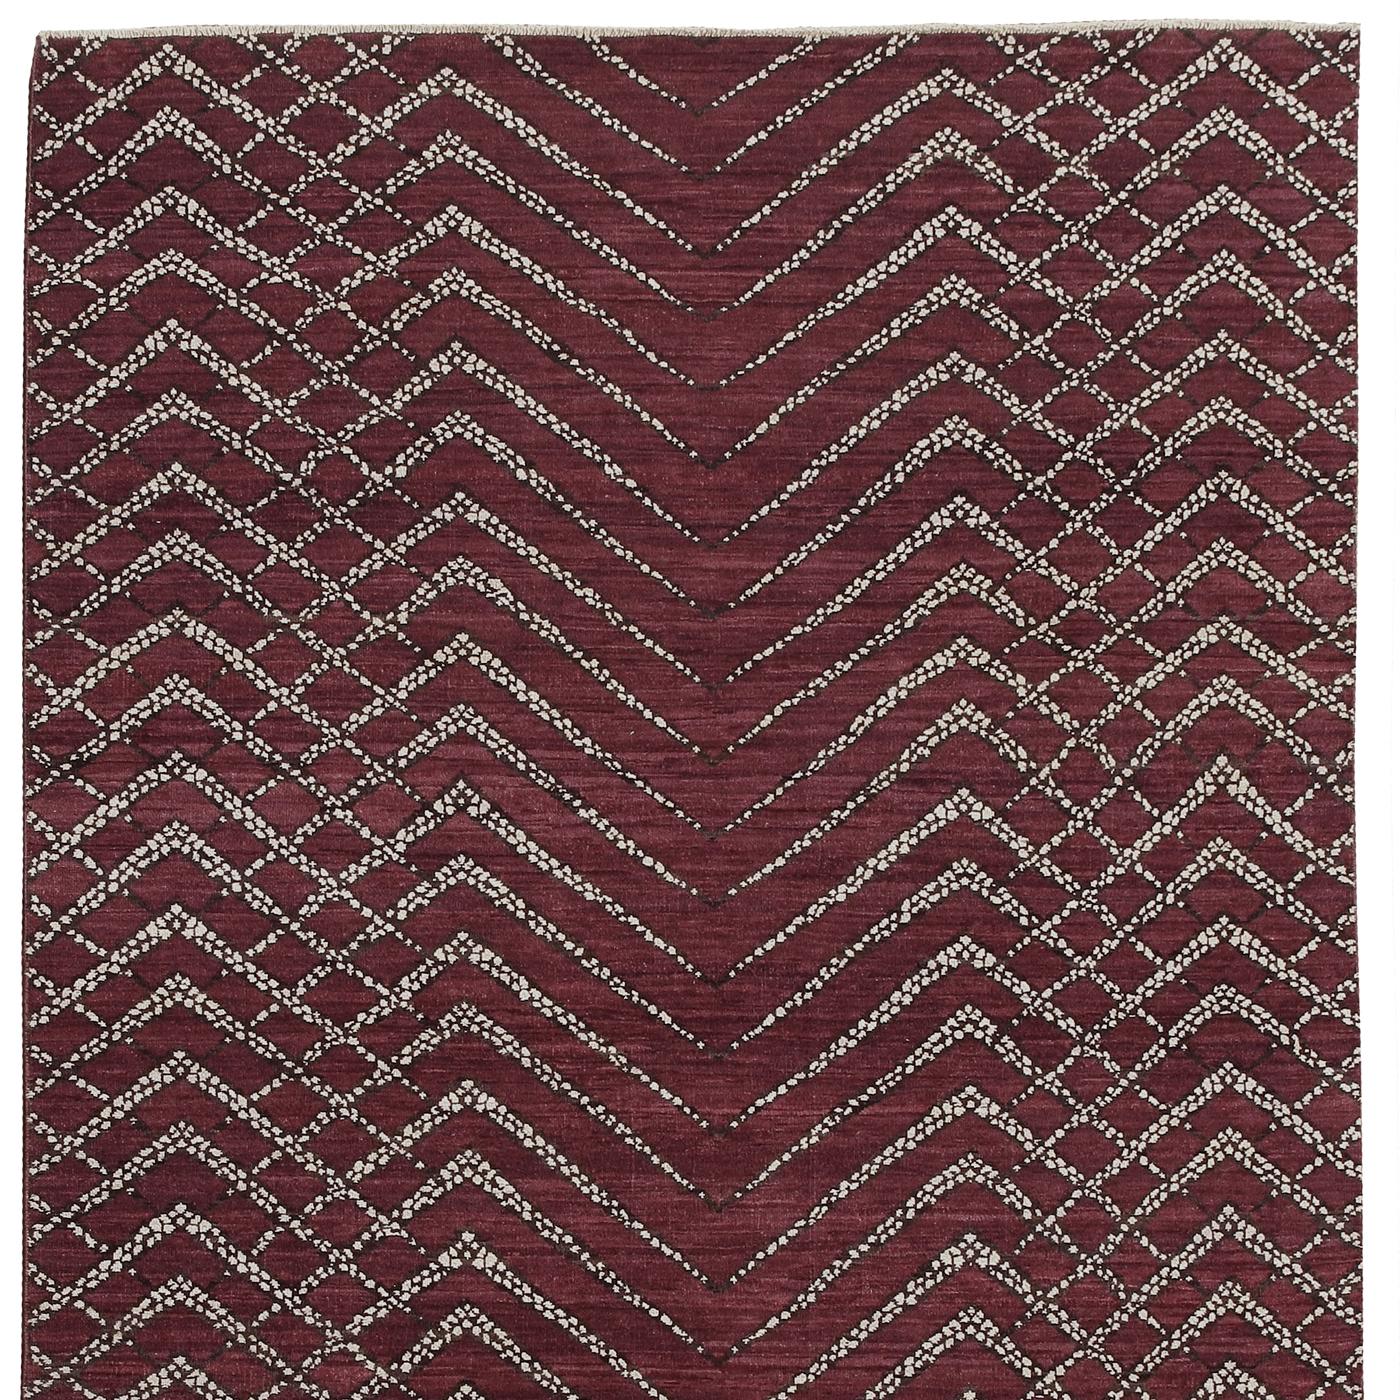 This exquisite carpet was hand-knotted using 100% wool. The design is by Allegra Hicks for Alberto Levi Gallery and it uses the same color palette and decoration of the other Zebrano piece in this same series, only reversed. So where the background